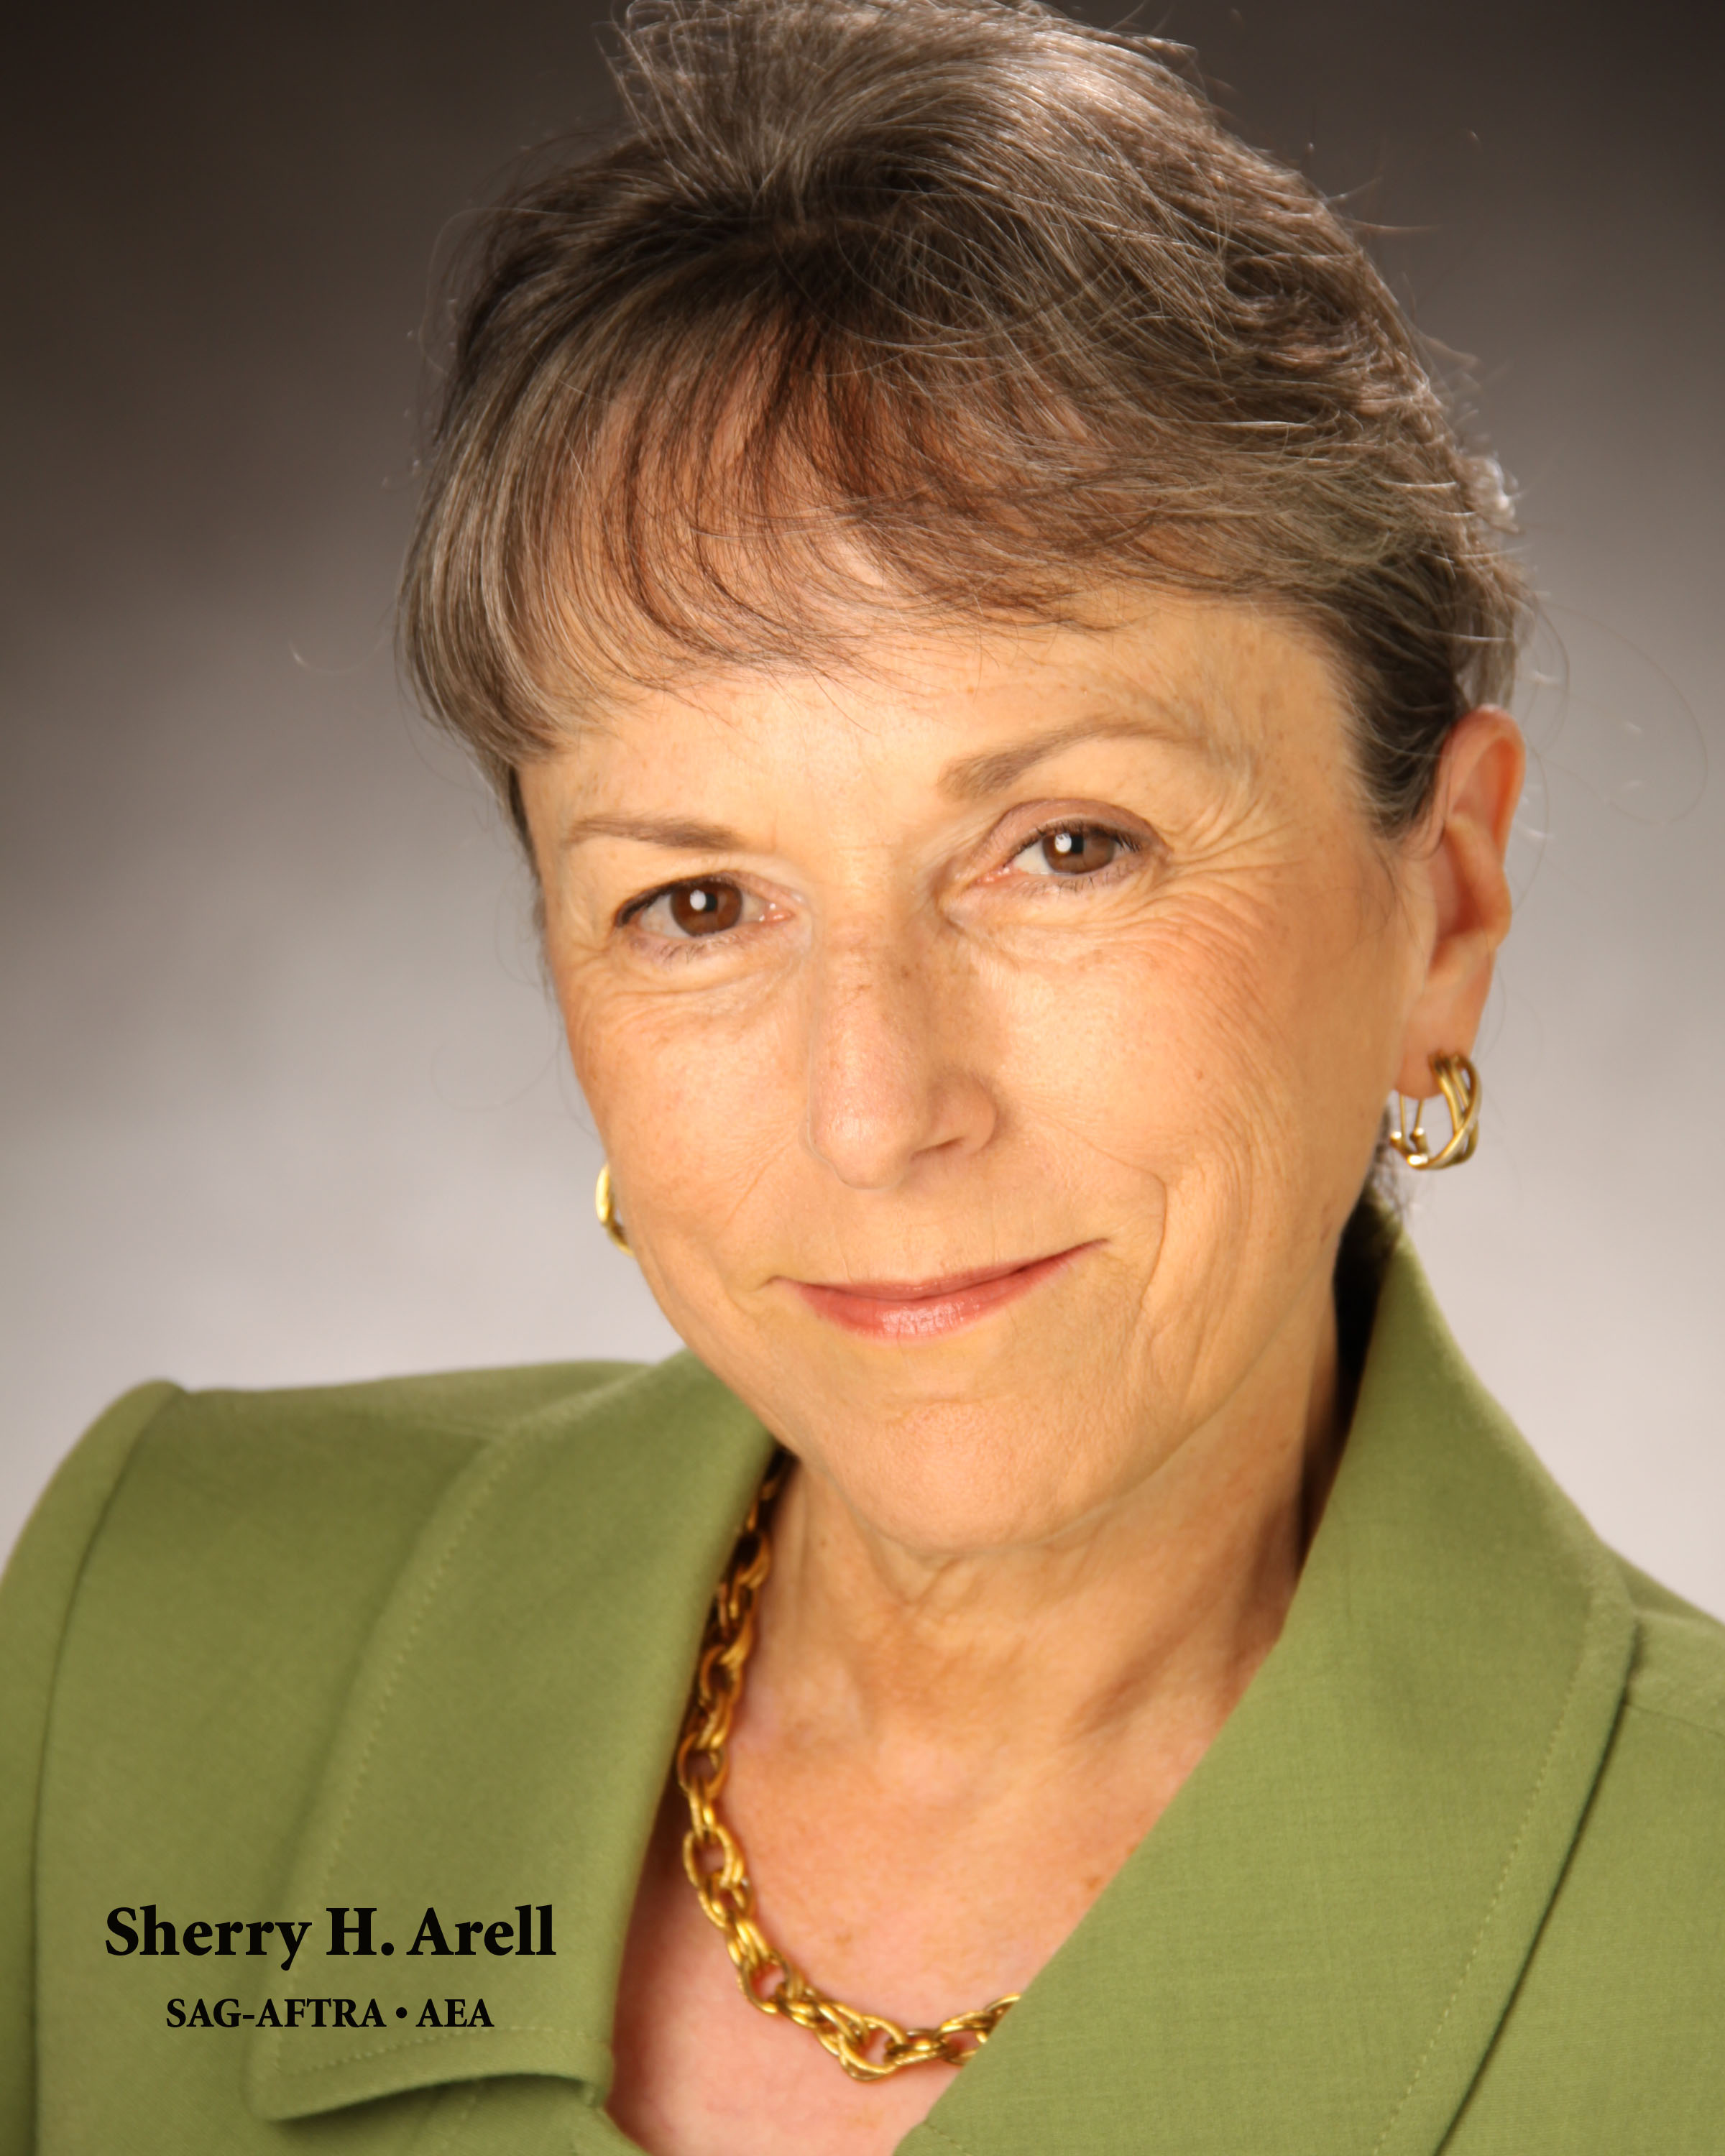 Sherry H. Arell